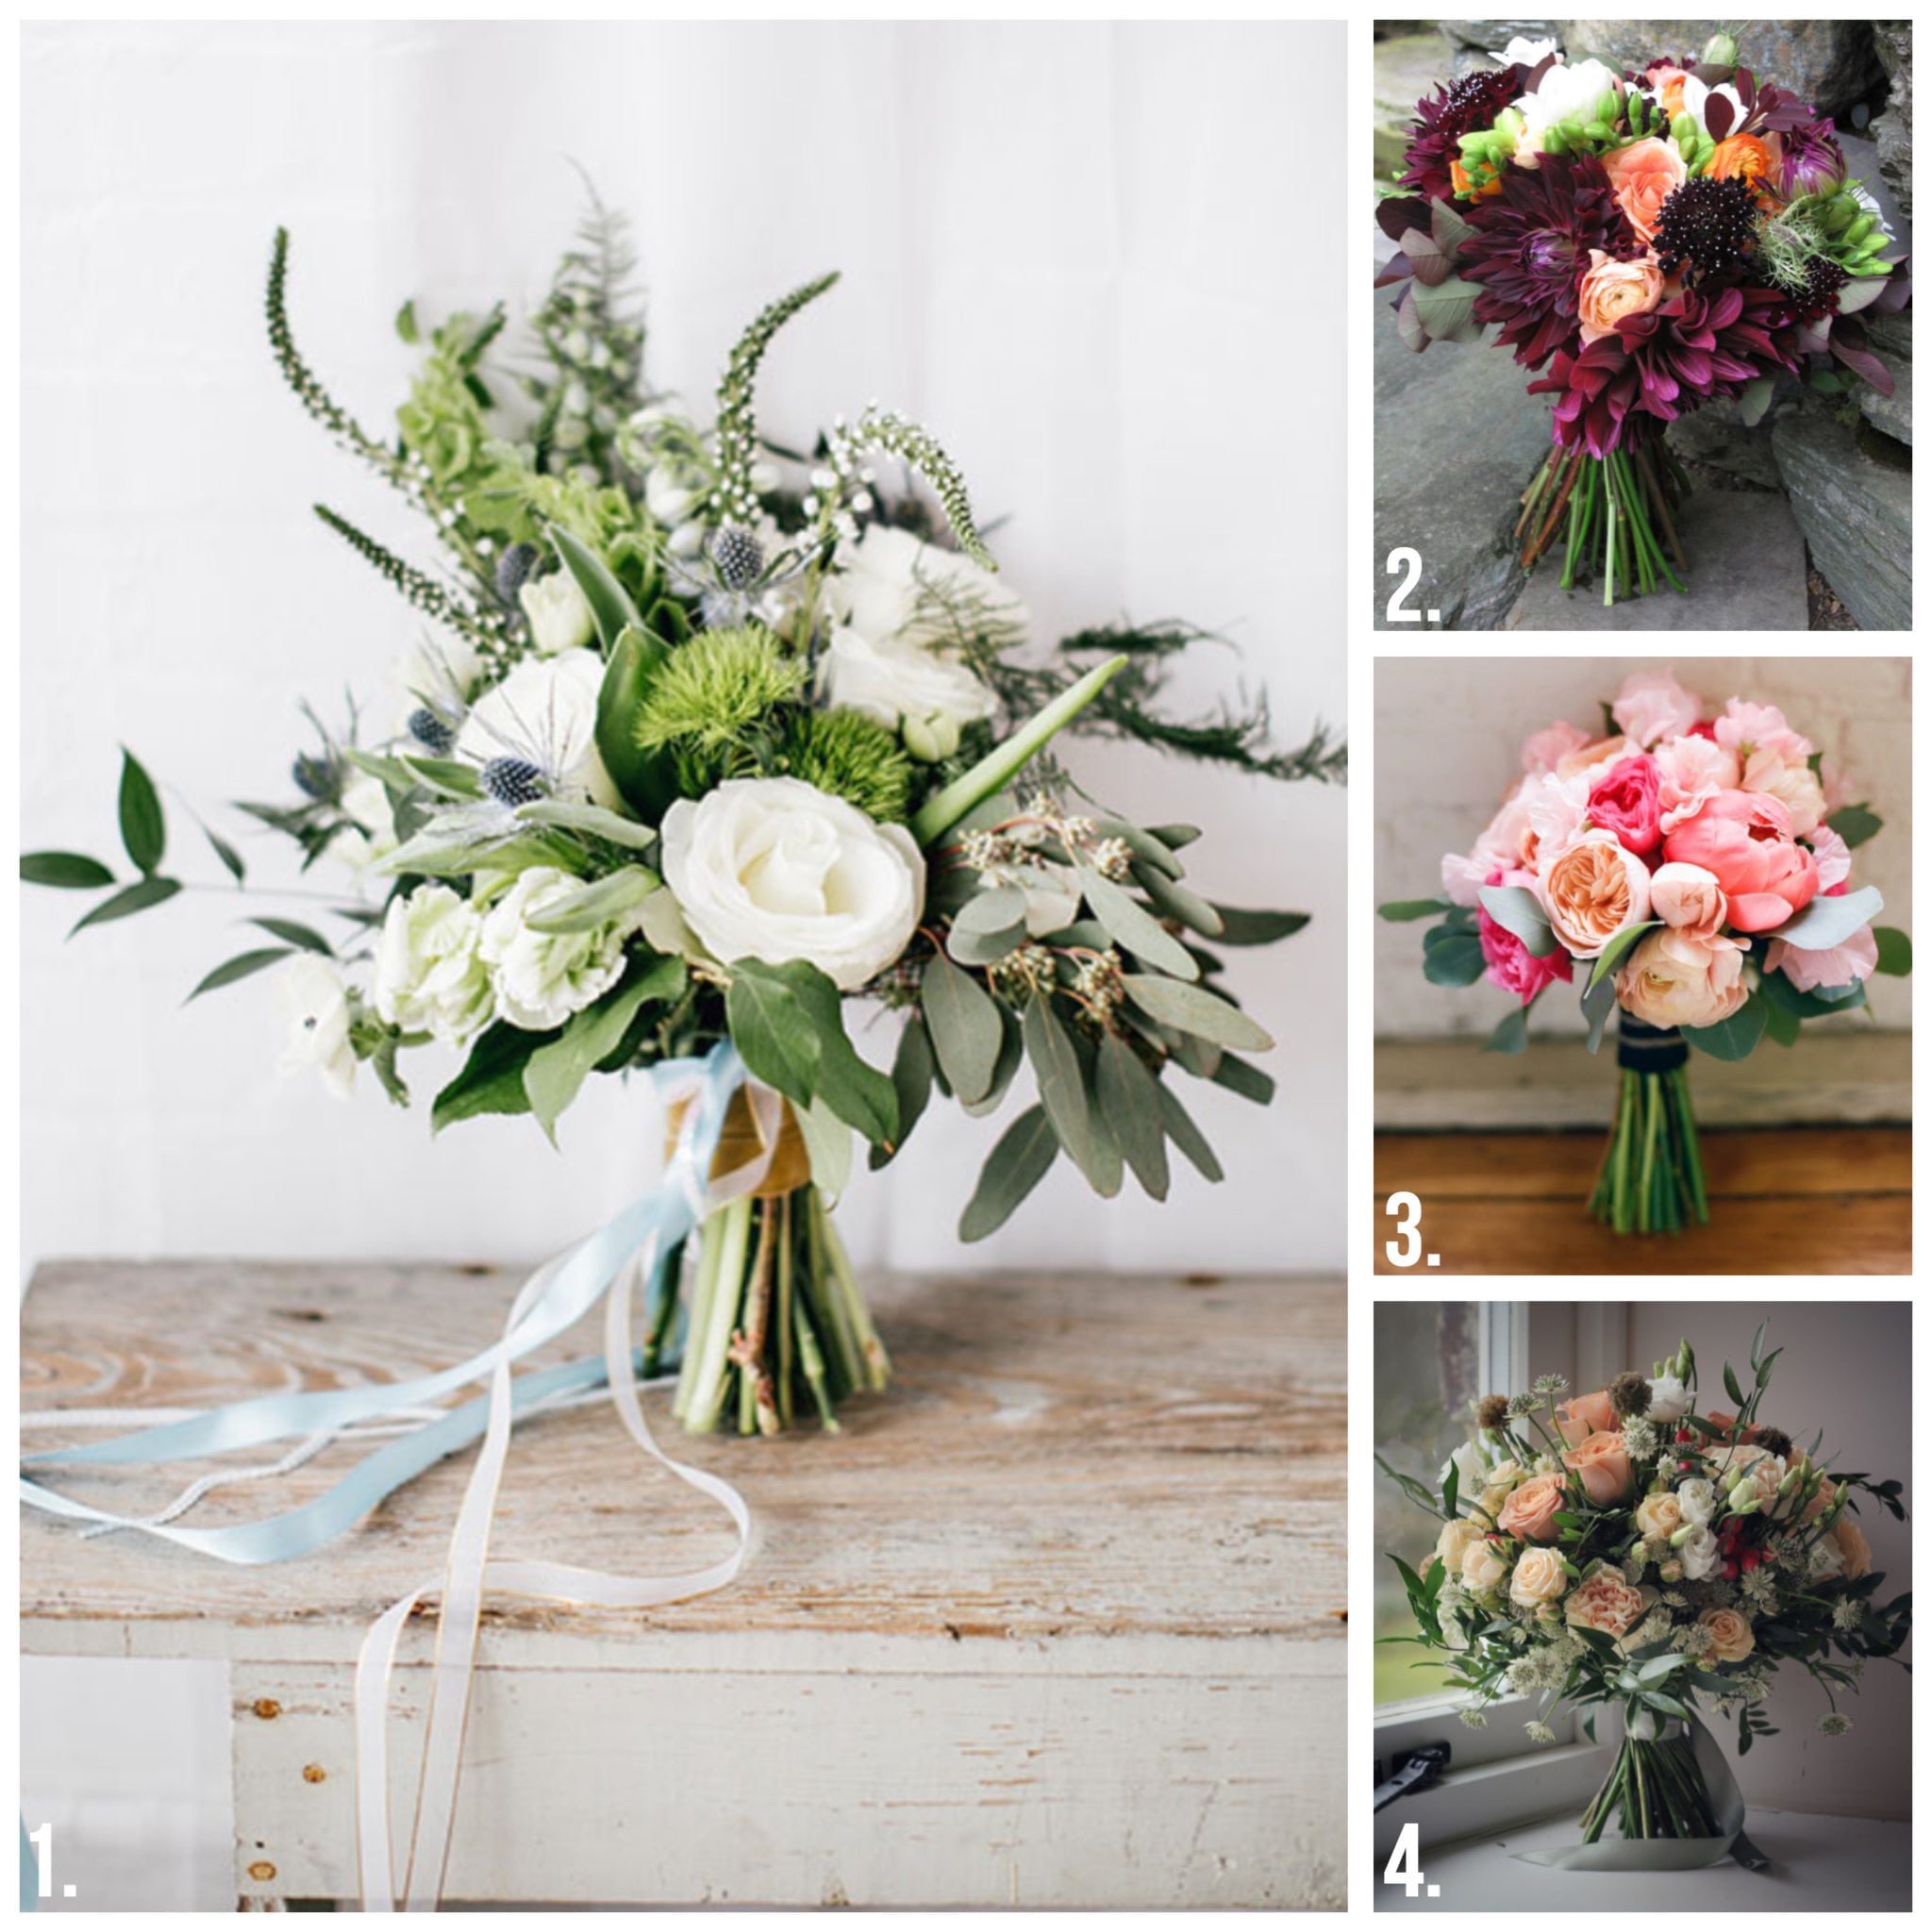 Four panel image of hand-tied bouquets